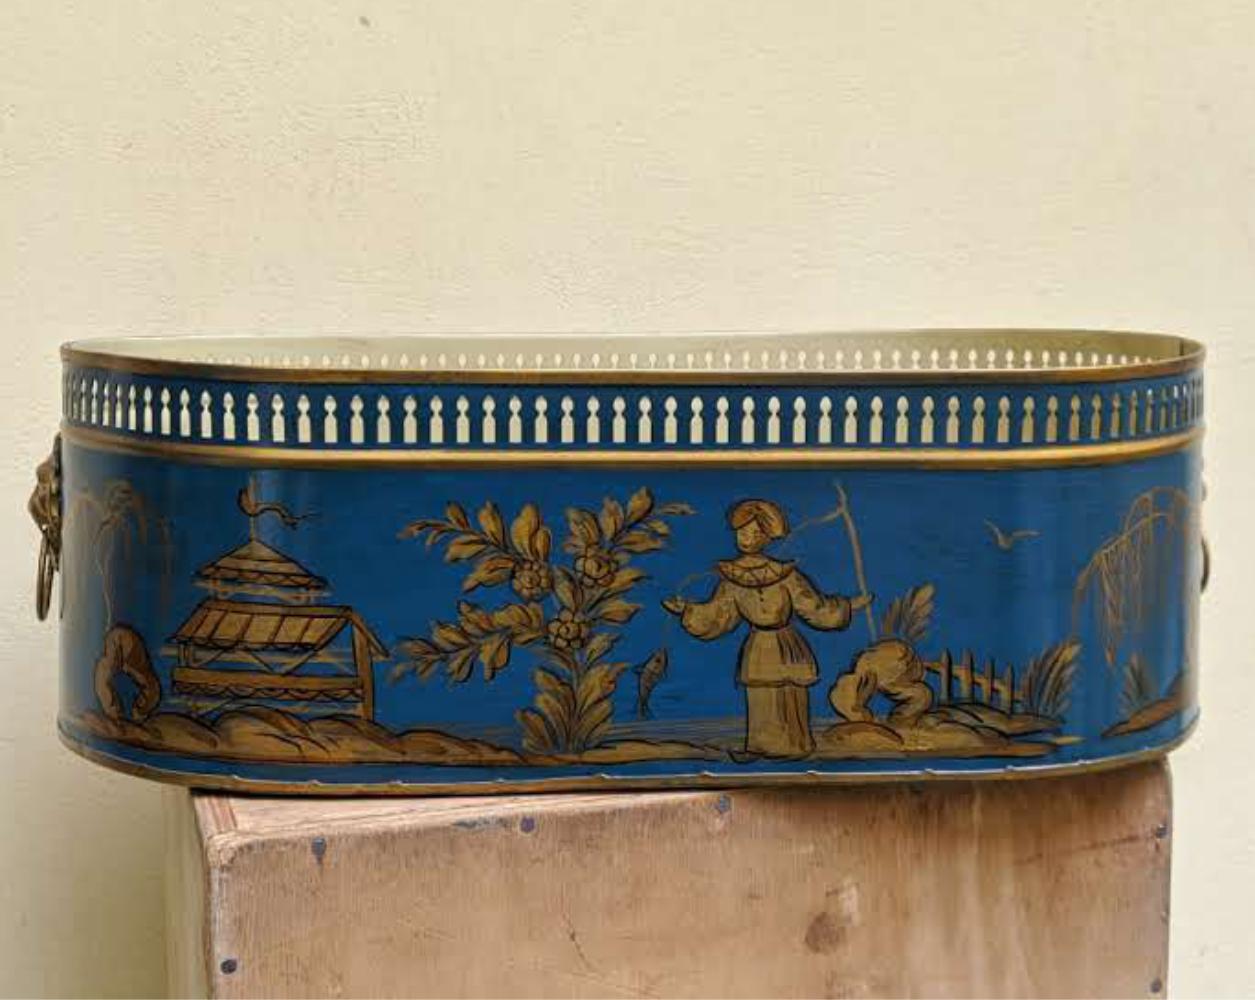 Limited production of French tole cachepot in chinoiserie style. Hand painted, Available in different colors. Two versions: one with a Chinese scene, the other with a vegetal decoration motif, typical of the Louis XVI period. Oval shaped with lion